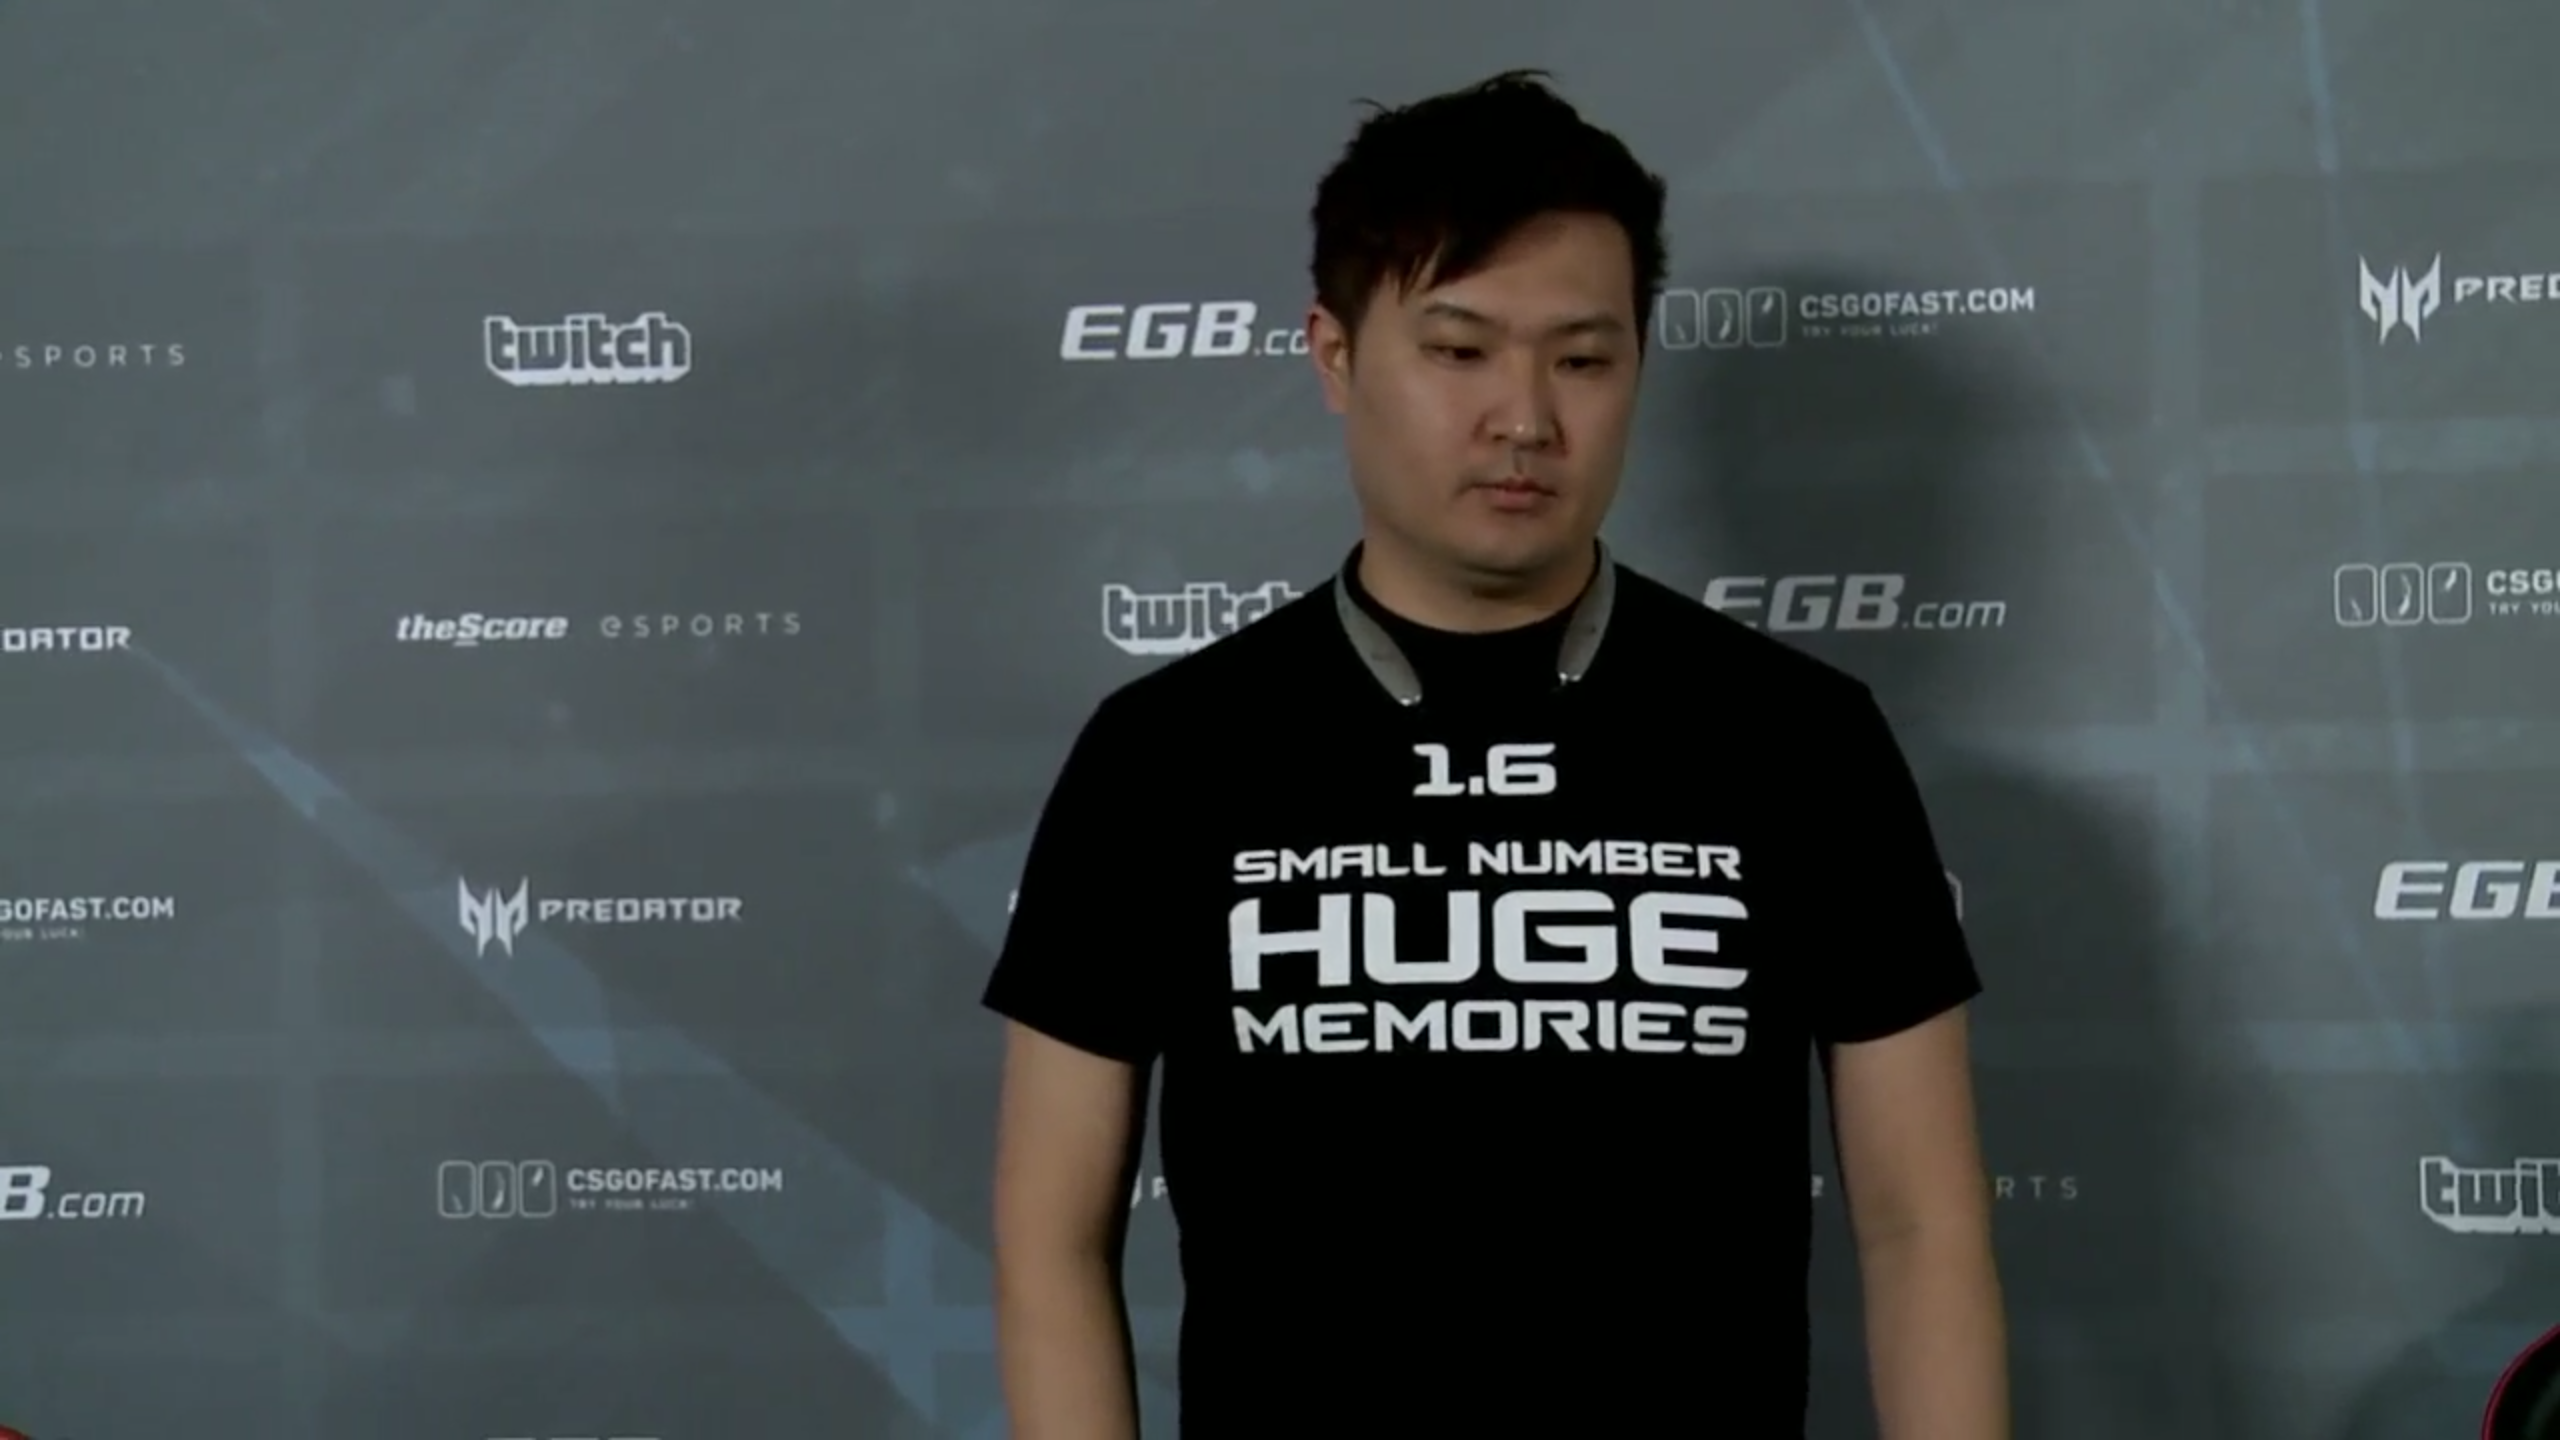 Sick shirt by the MVP project's coach